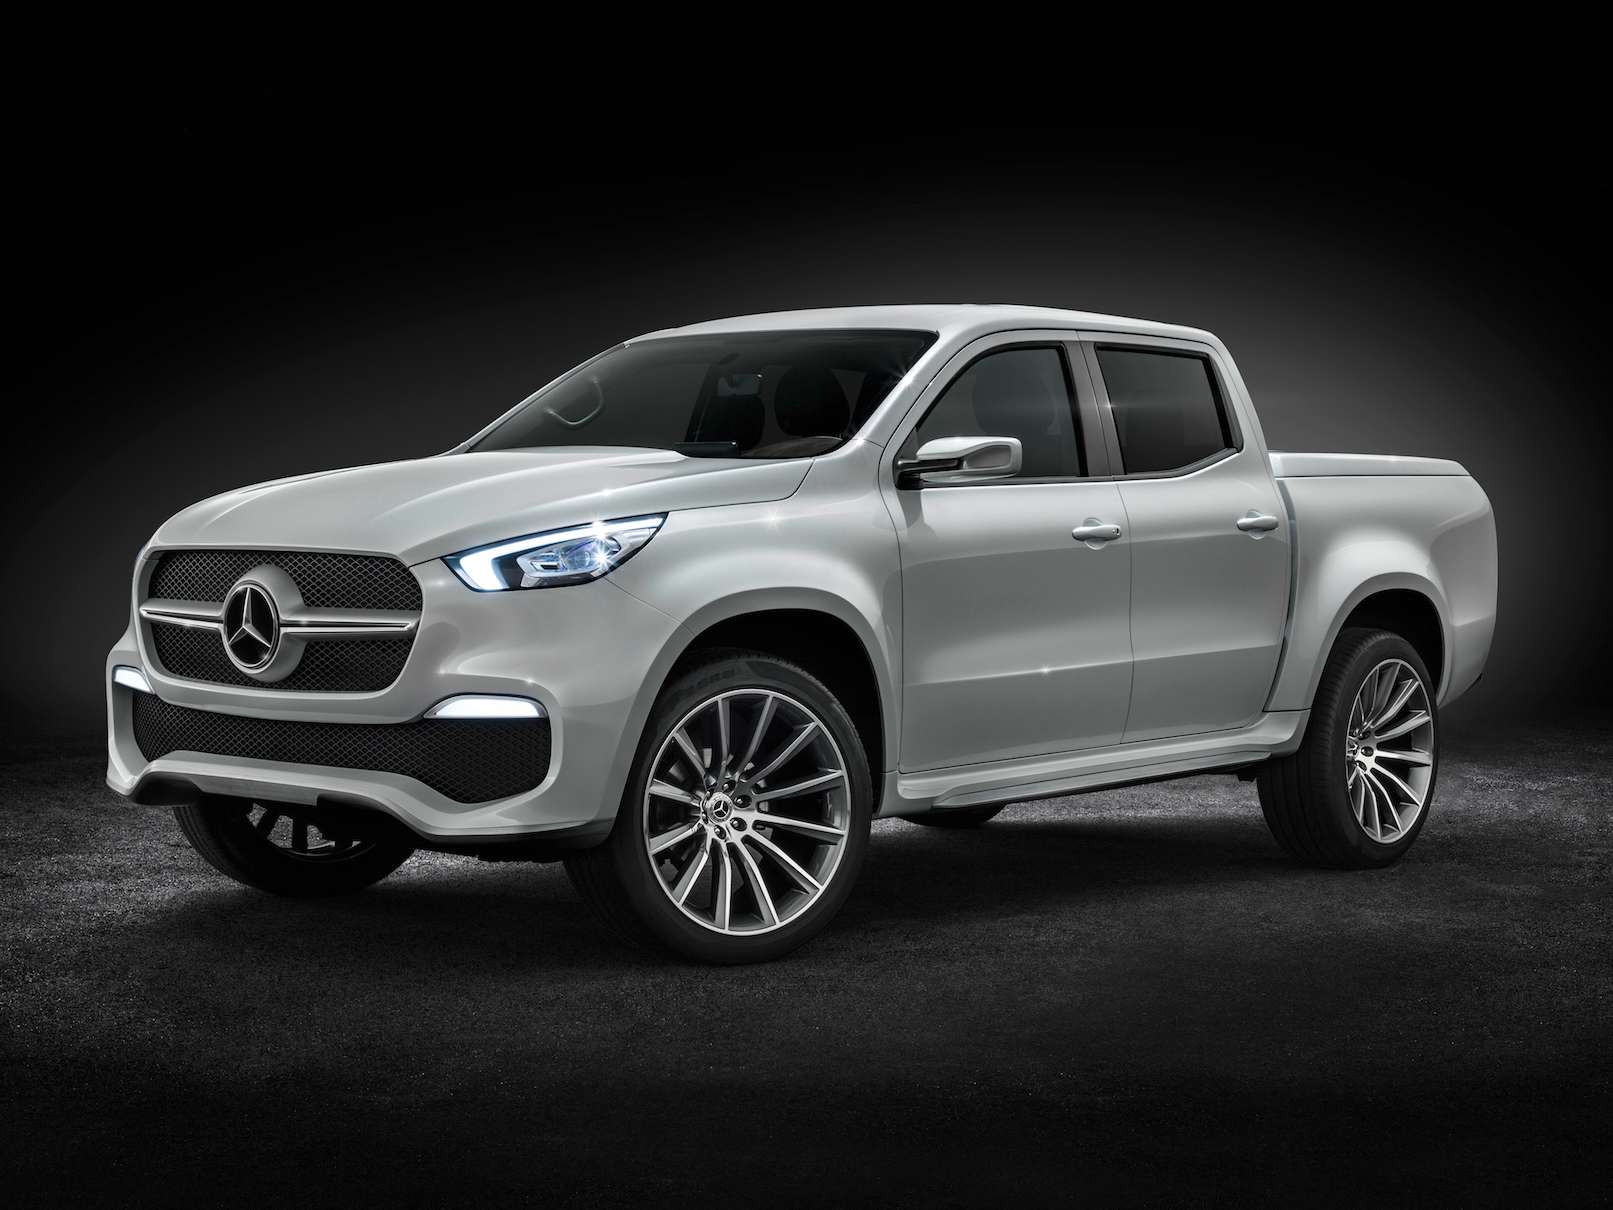 The Mercedes-Benz pickup truck is here — and it's called the X-Class - Business Insider